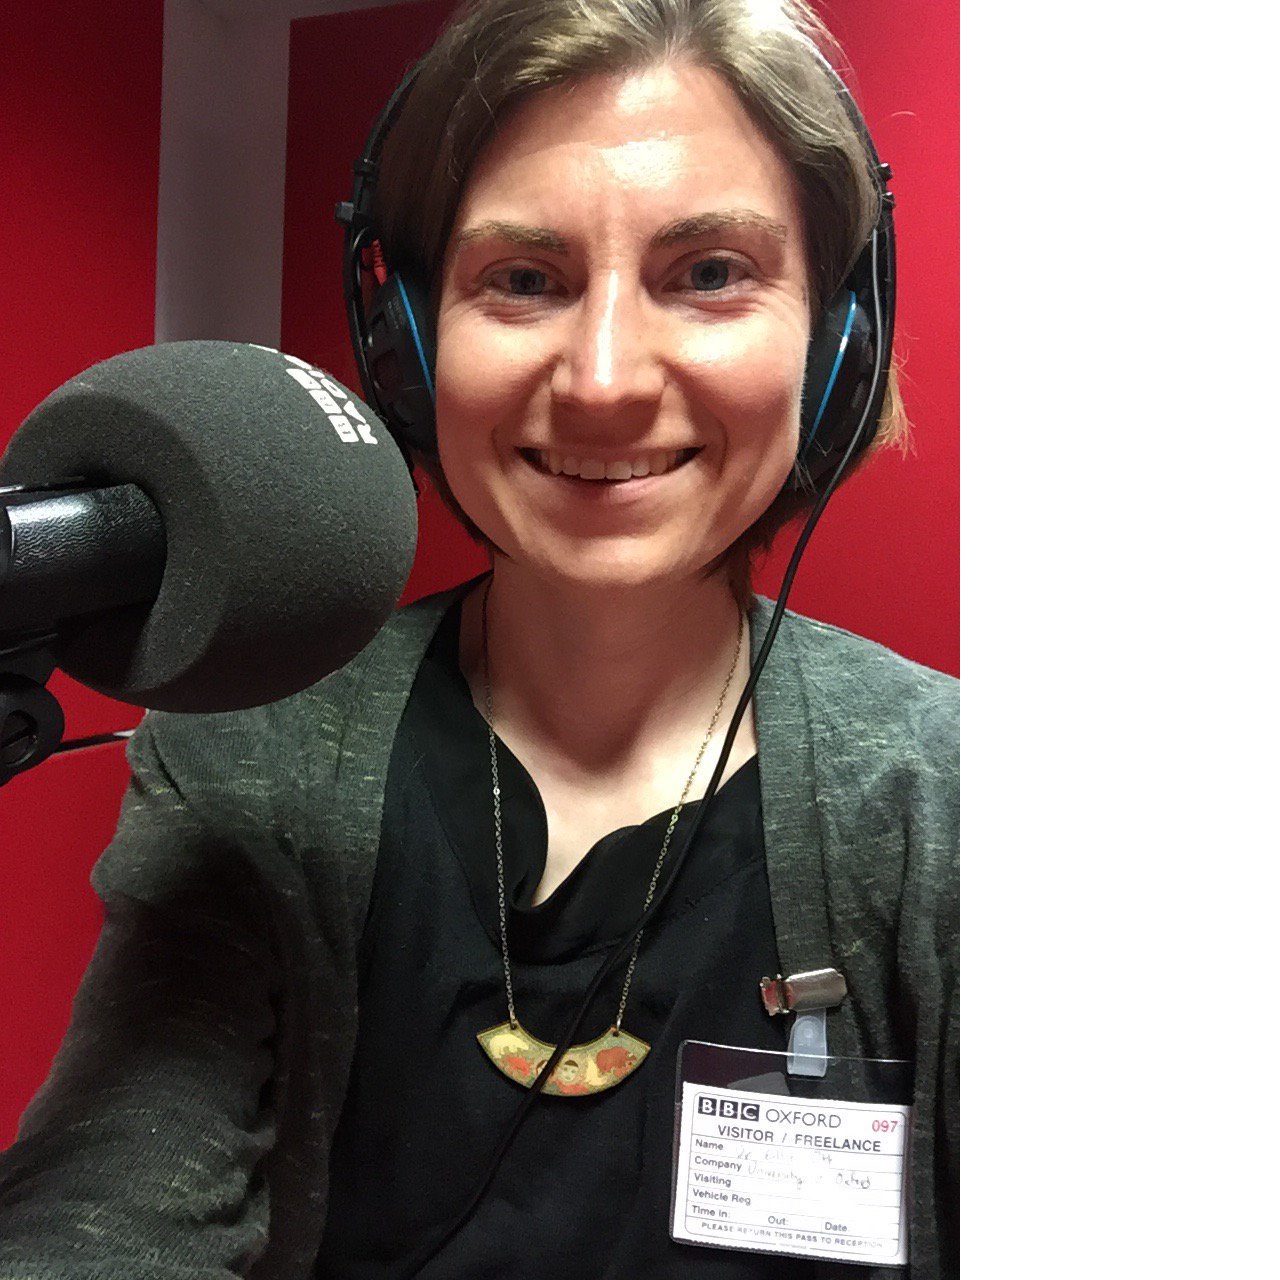 Dr Ellie Ott with a radio microphone and headphones